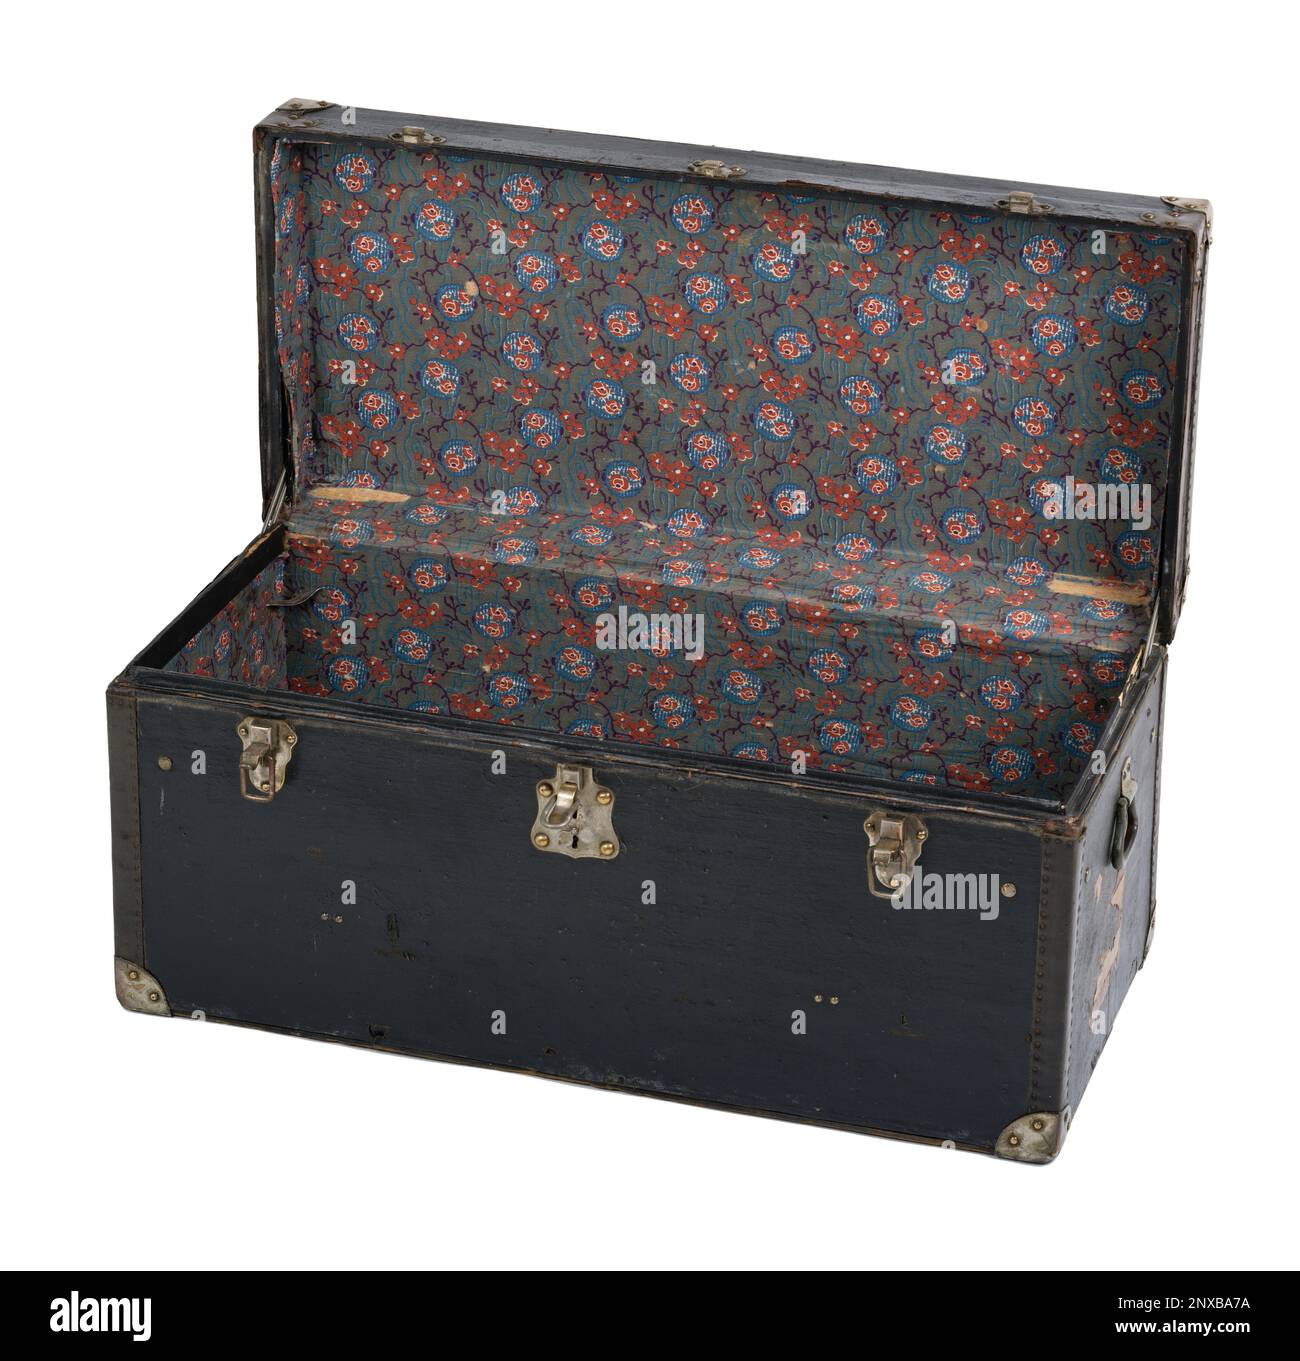 An old fashioned wooden trunk. A black trunk with metal reinforced corners and leather trimmed edges. Stock Photo